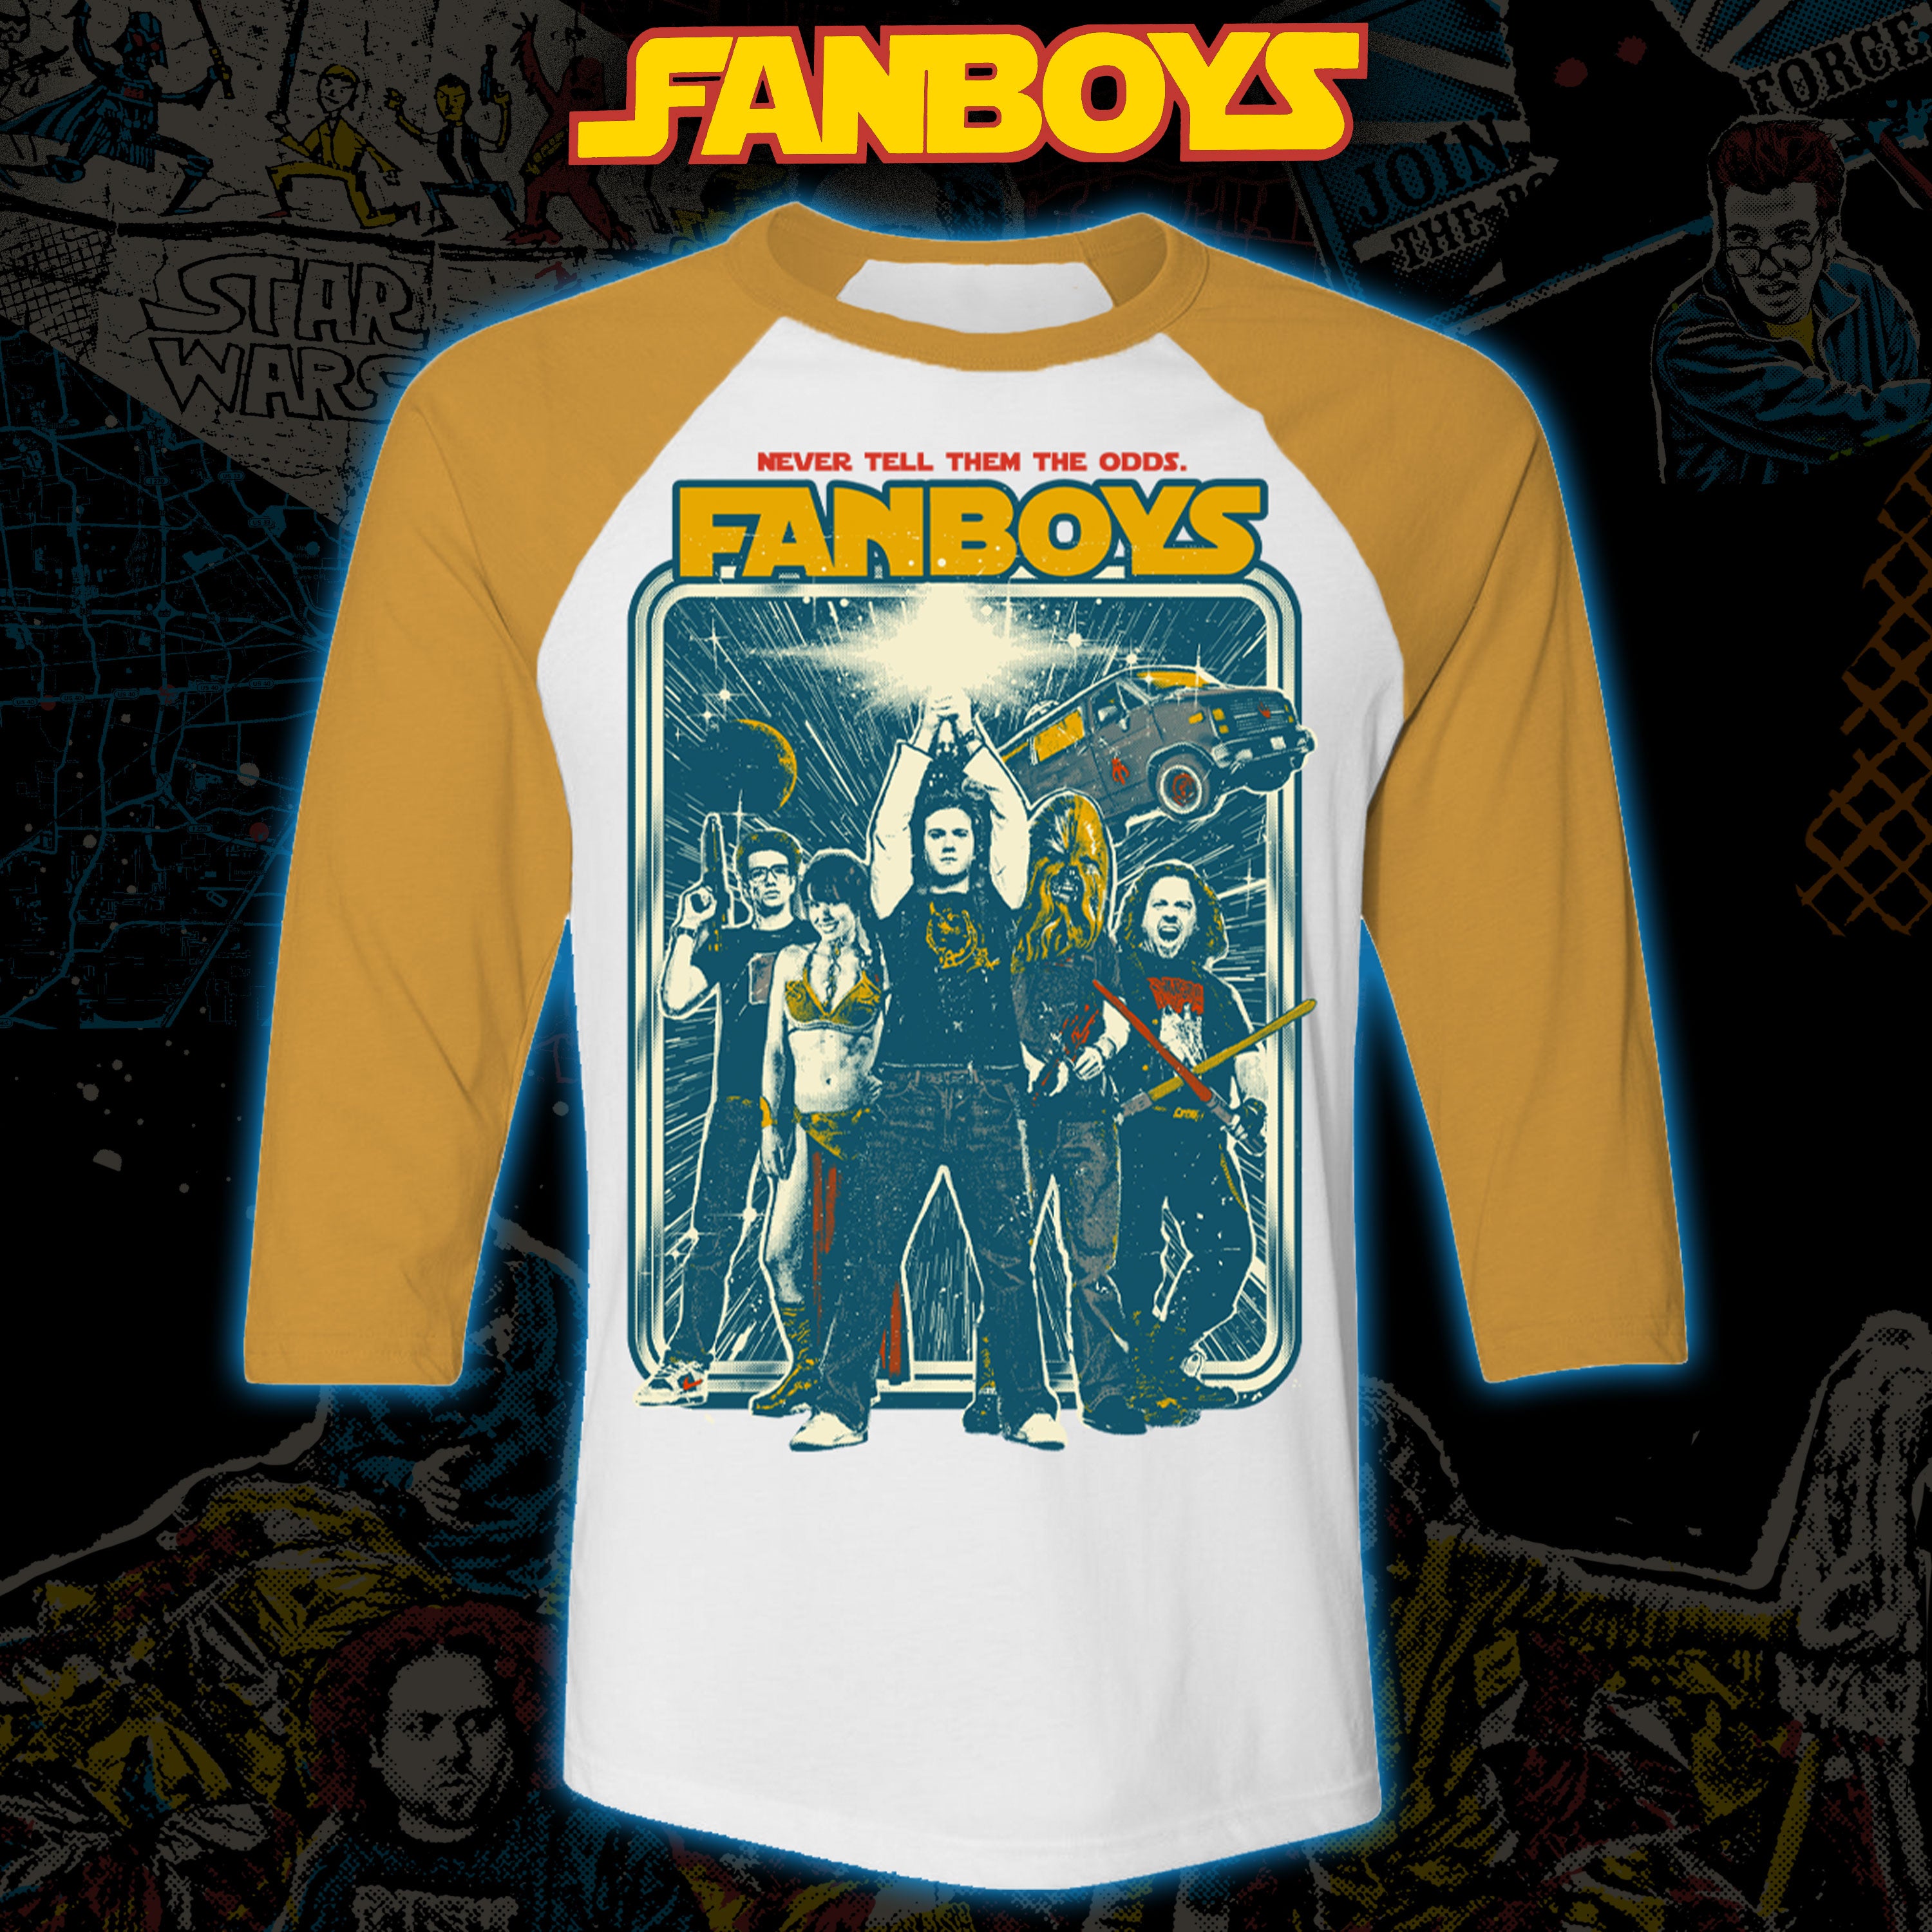 Fanboys "Conquest for the Ages" Baseball tee